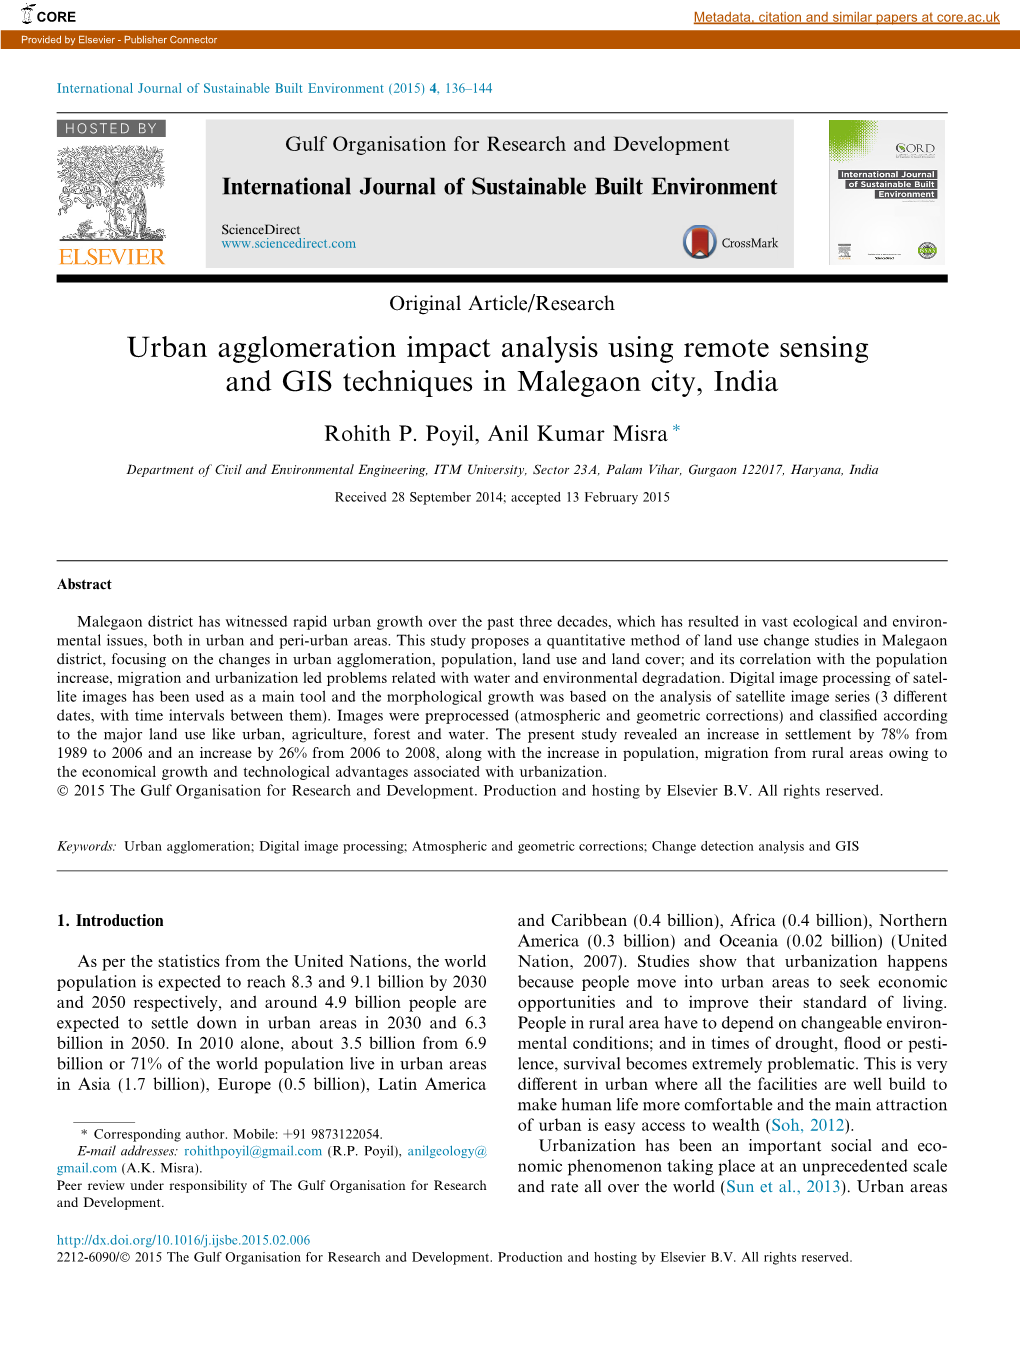 Urban Agglomeration Impact Analysis Using Remote Sensing and GIS Techniques in Malegaon City, India